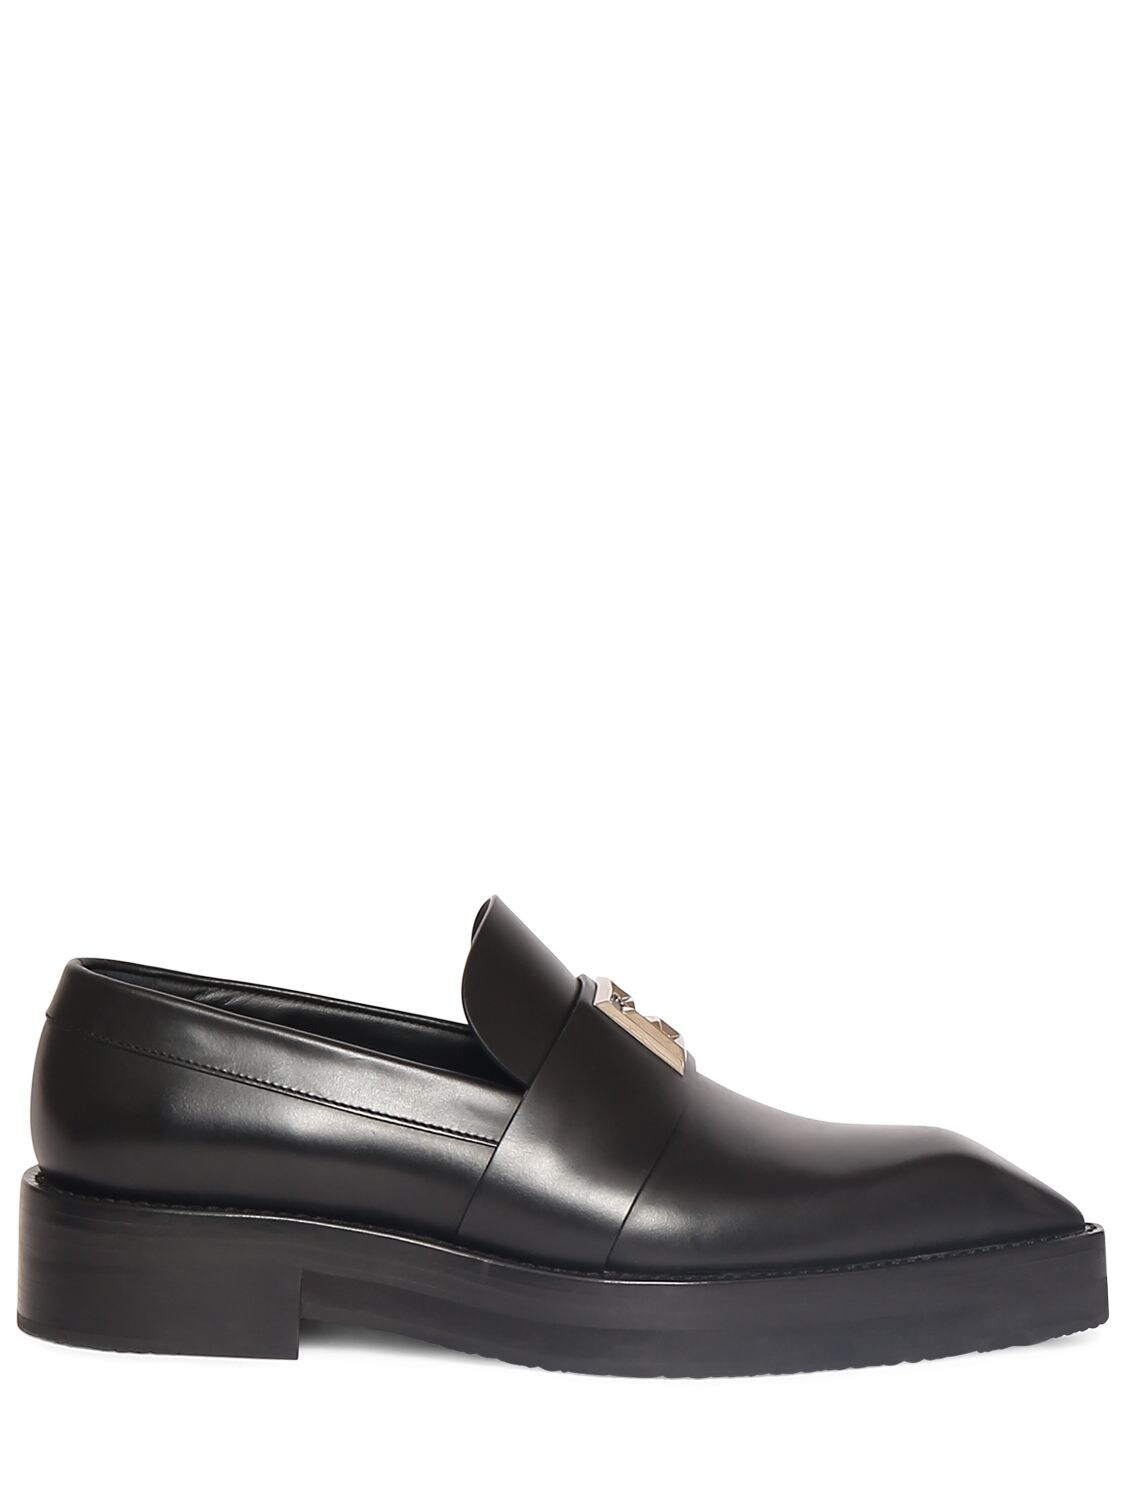 Balmain Ben Leather Loafers In Black